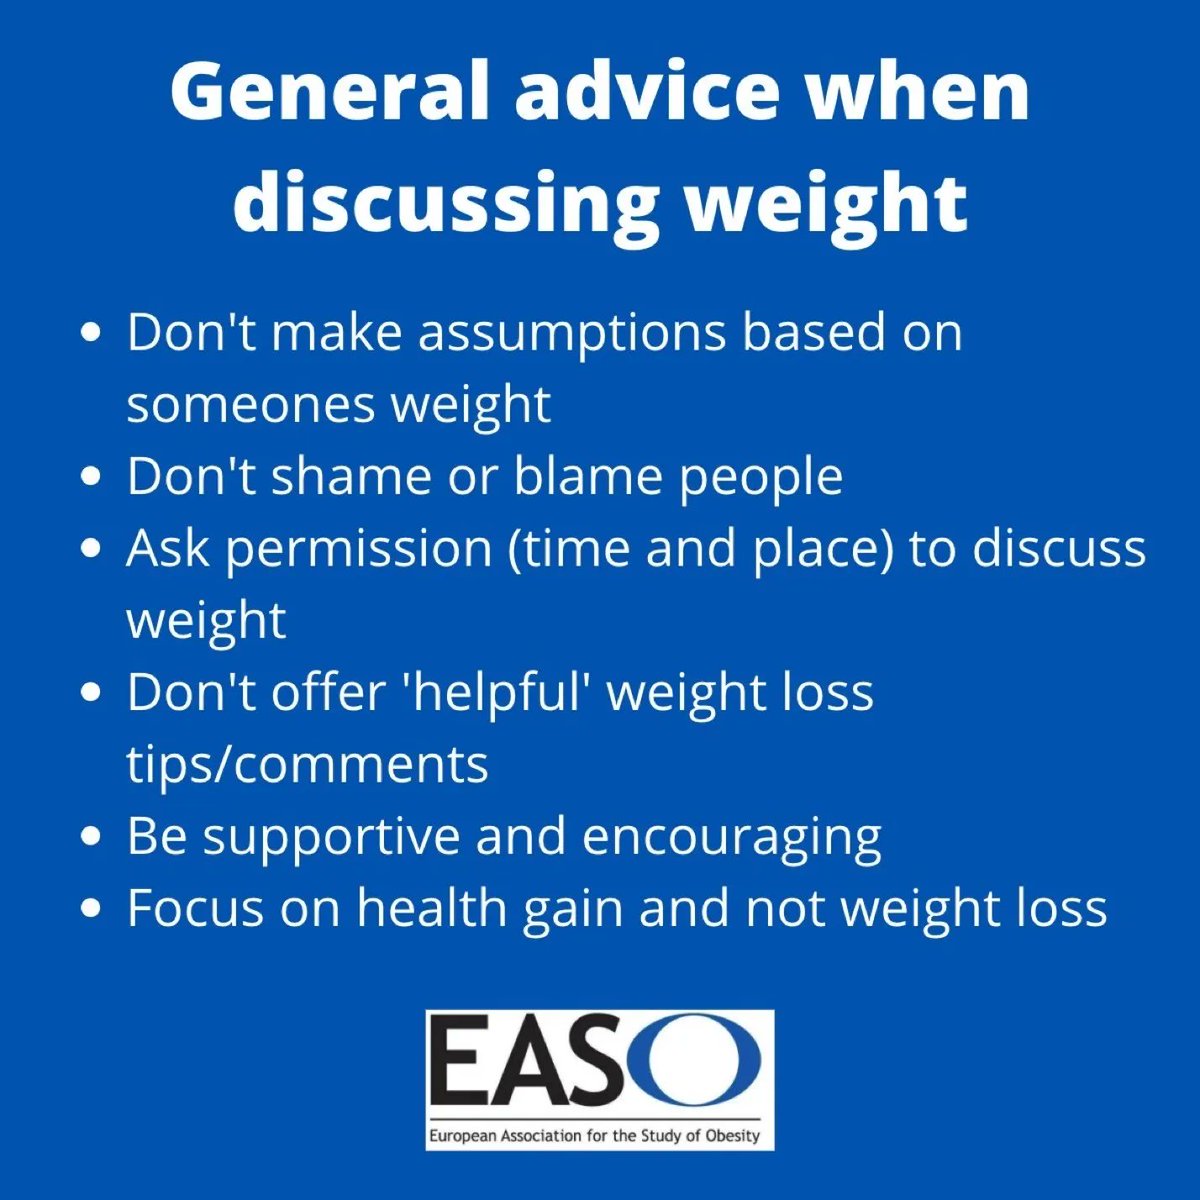 If you are a doctor, nurse or friend discussing weight... consider the following: 🚫 Don't make assumptions based on weight 🚫 Don't shame or blame 🚫 Don't offer 'helpful' weight loss tips/comments ✔️ Do be supportive and encouraging! easo.org/talking-about-… #obesity